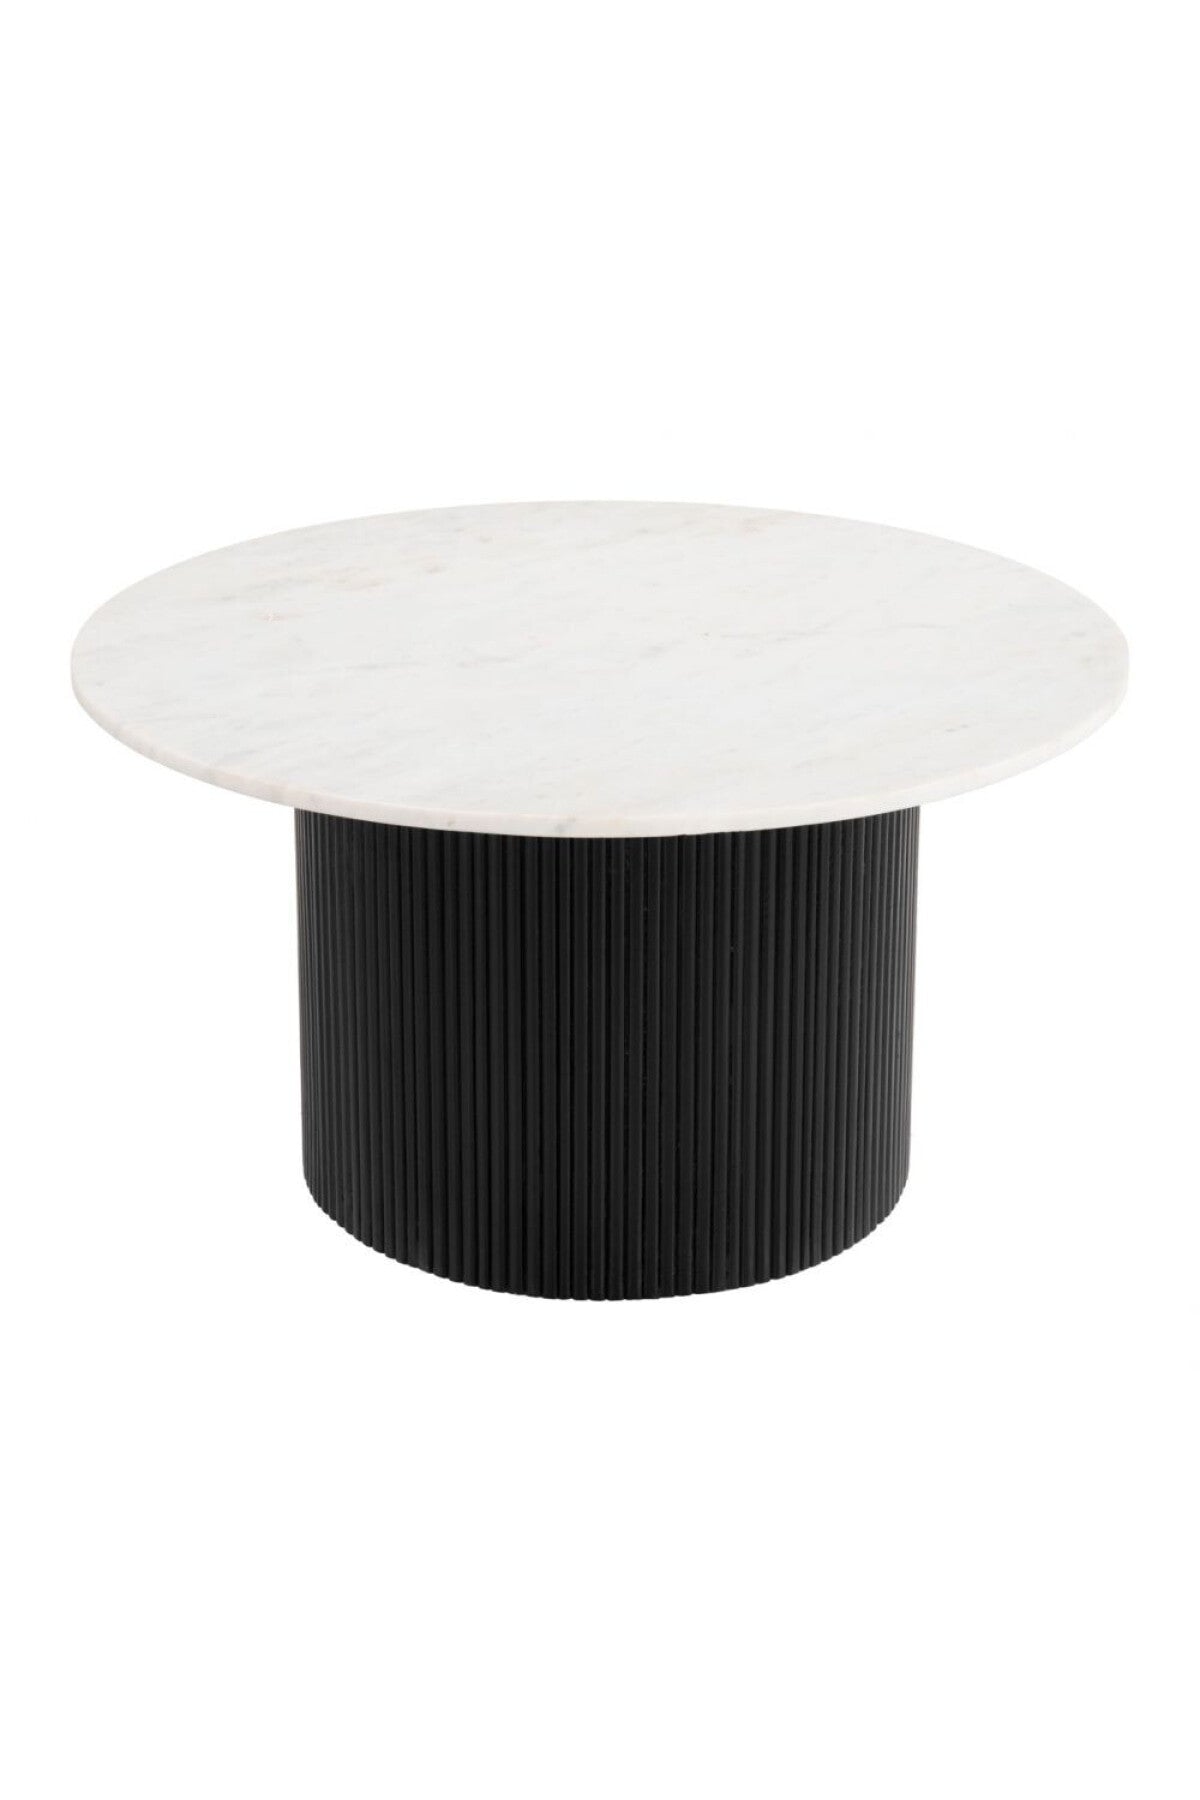 Avery Dining Table- Black